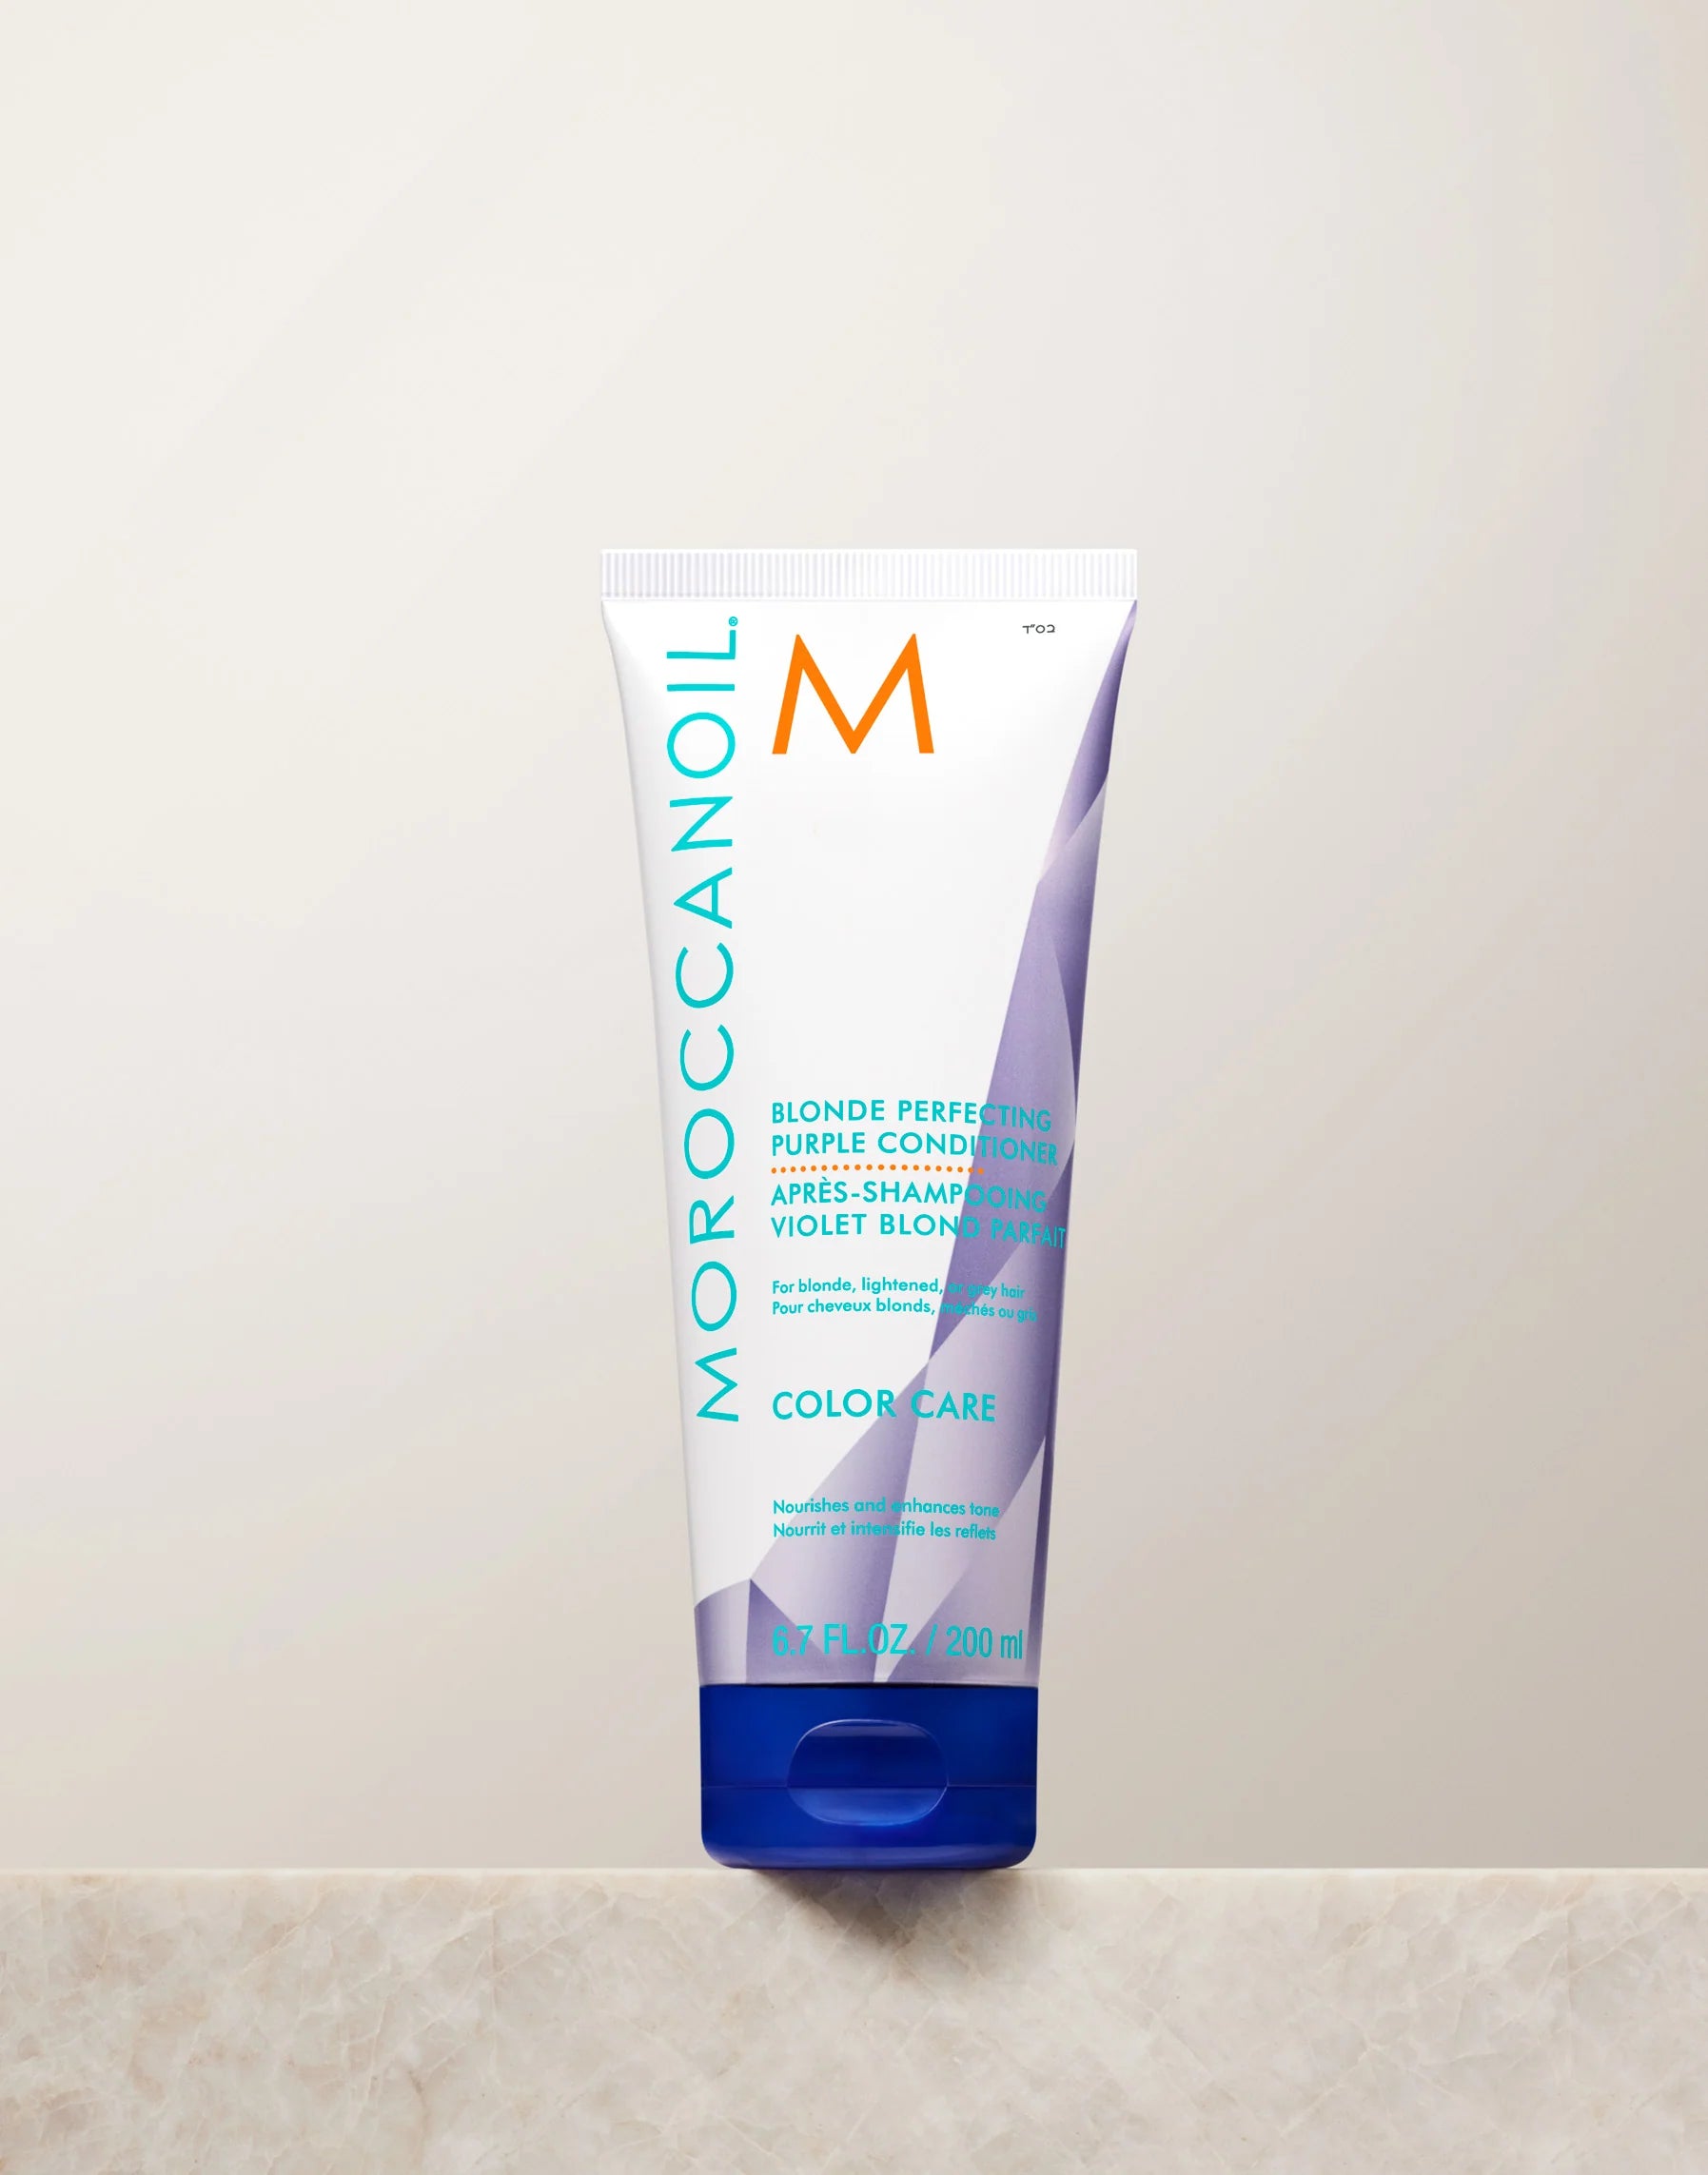 Toning conditioner for blondes (MoroccanOil Blonde Perfecting Purple Conditioner)